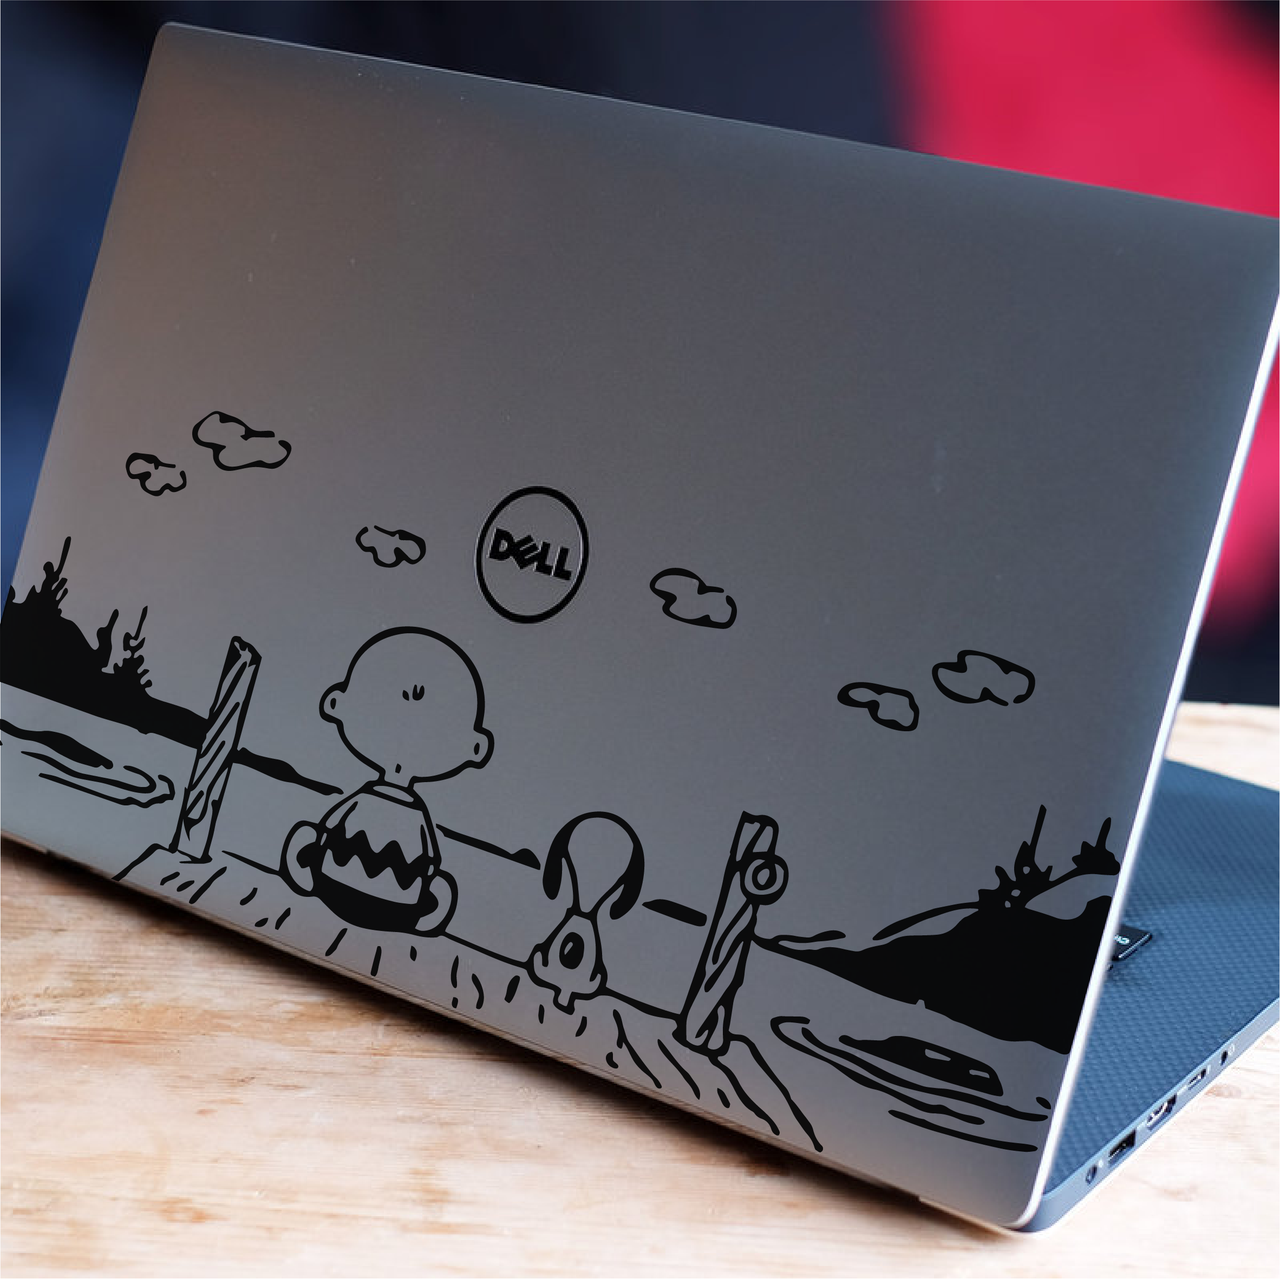 Snoopy and Charlie Brown Sunset Laptop Decal